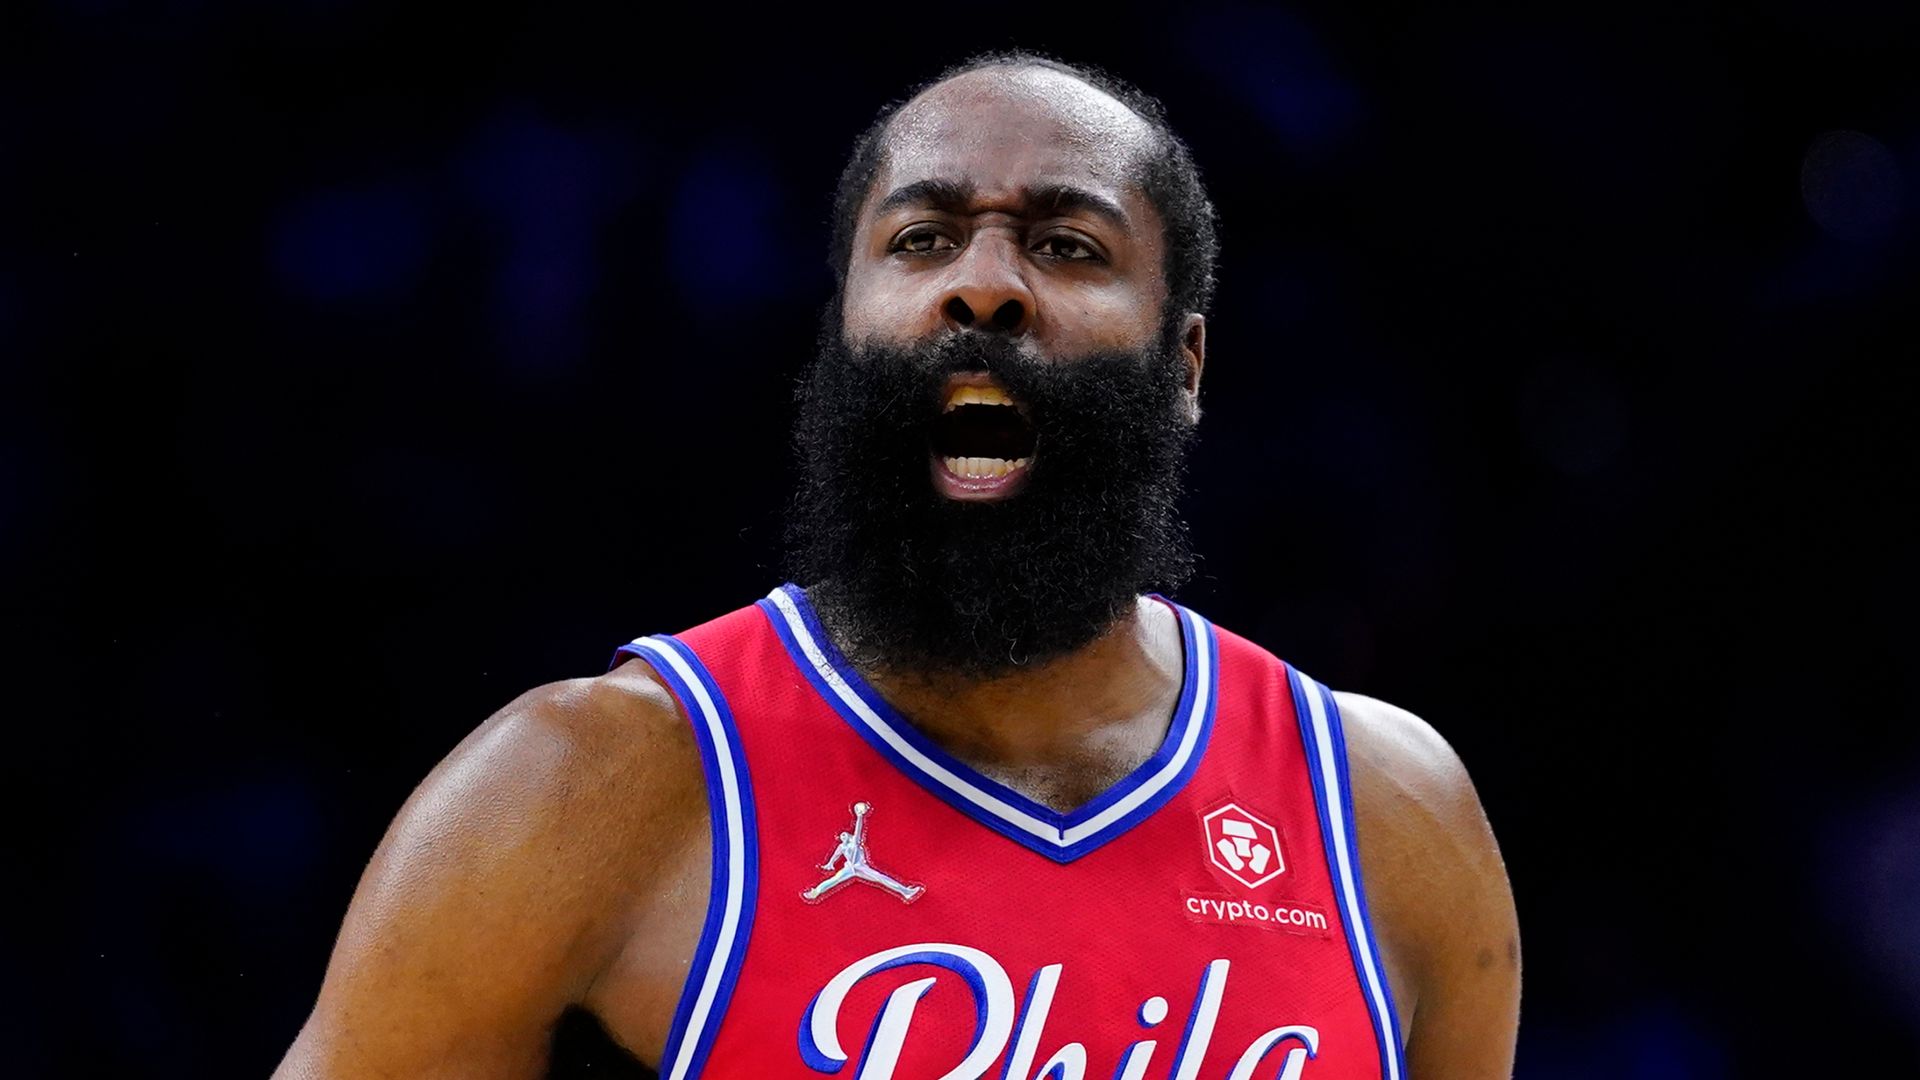 NBA fines Harden $100K for comments on Morey